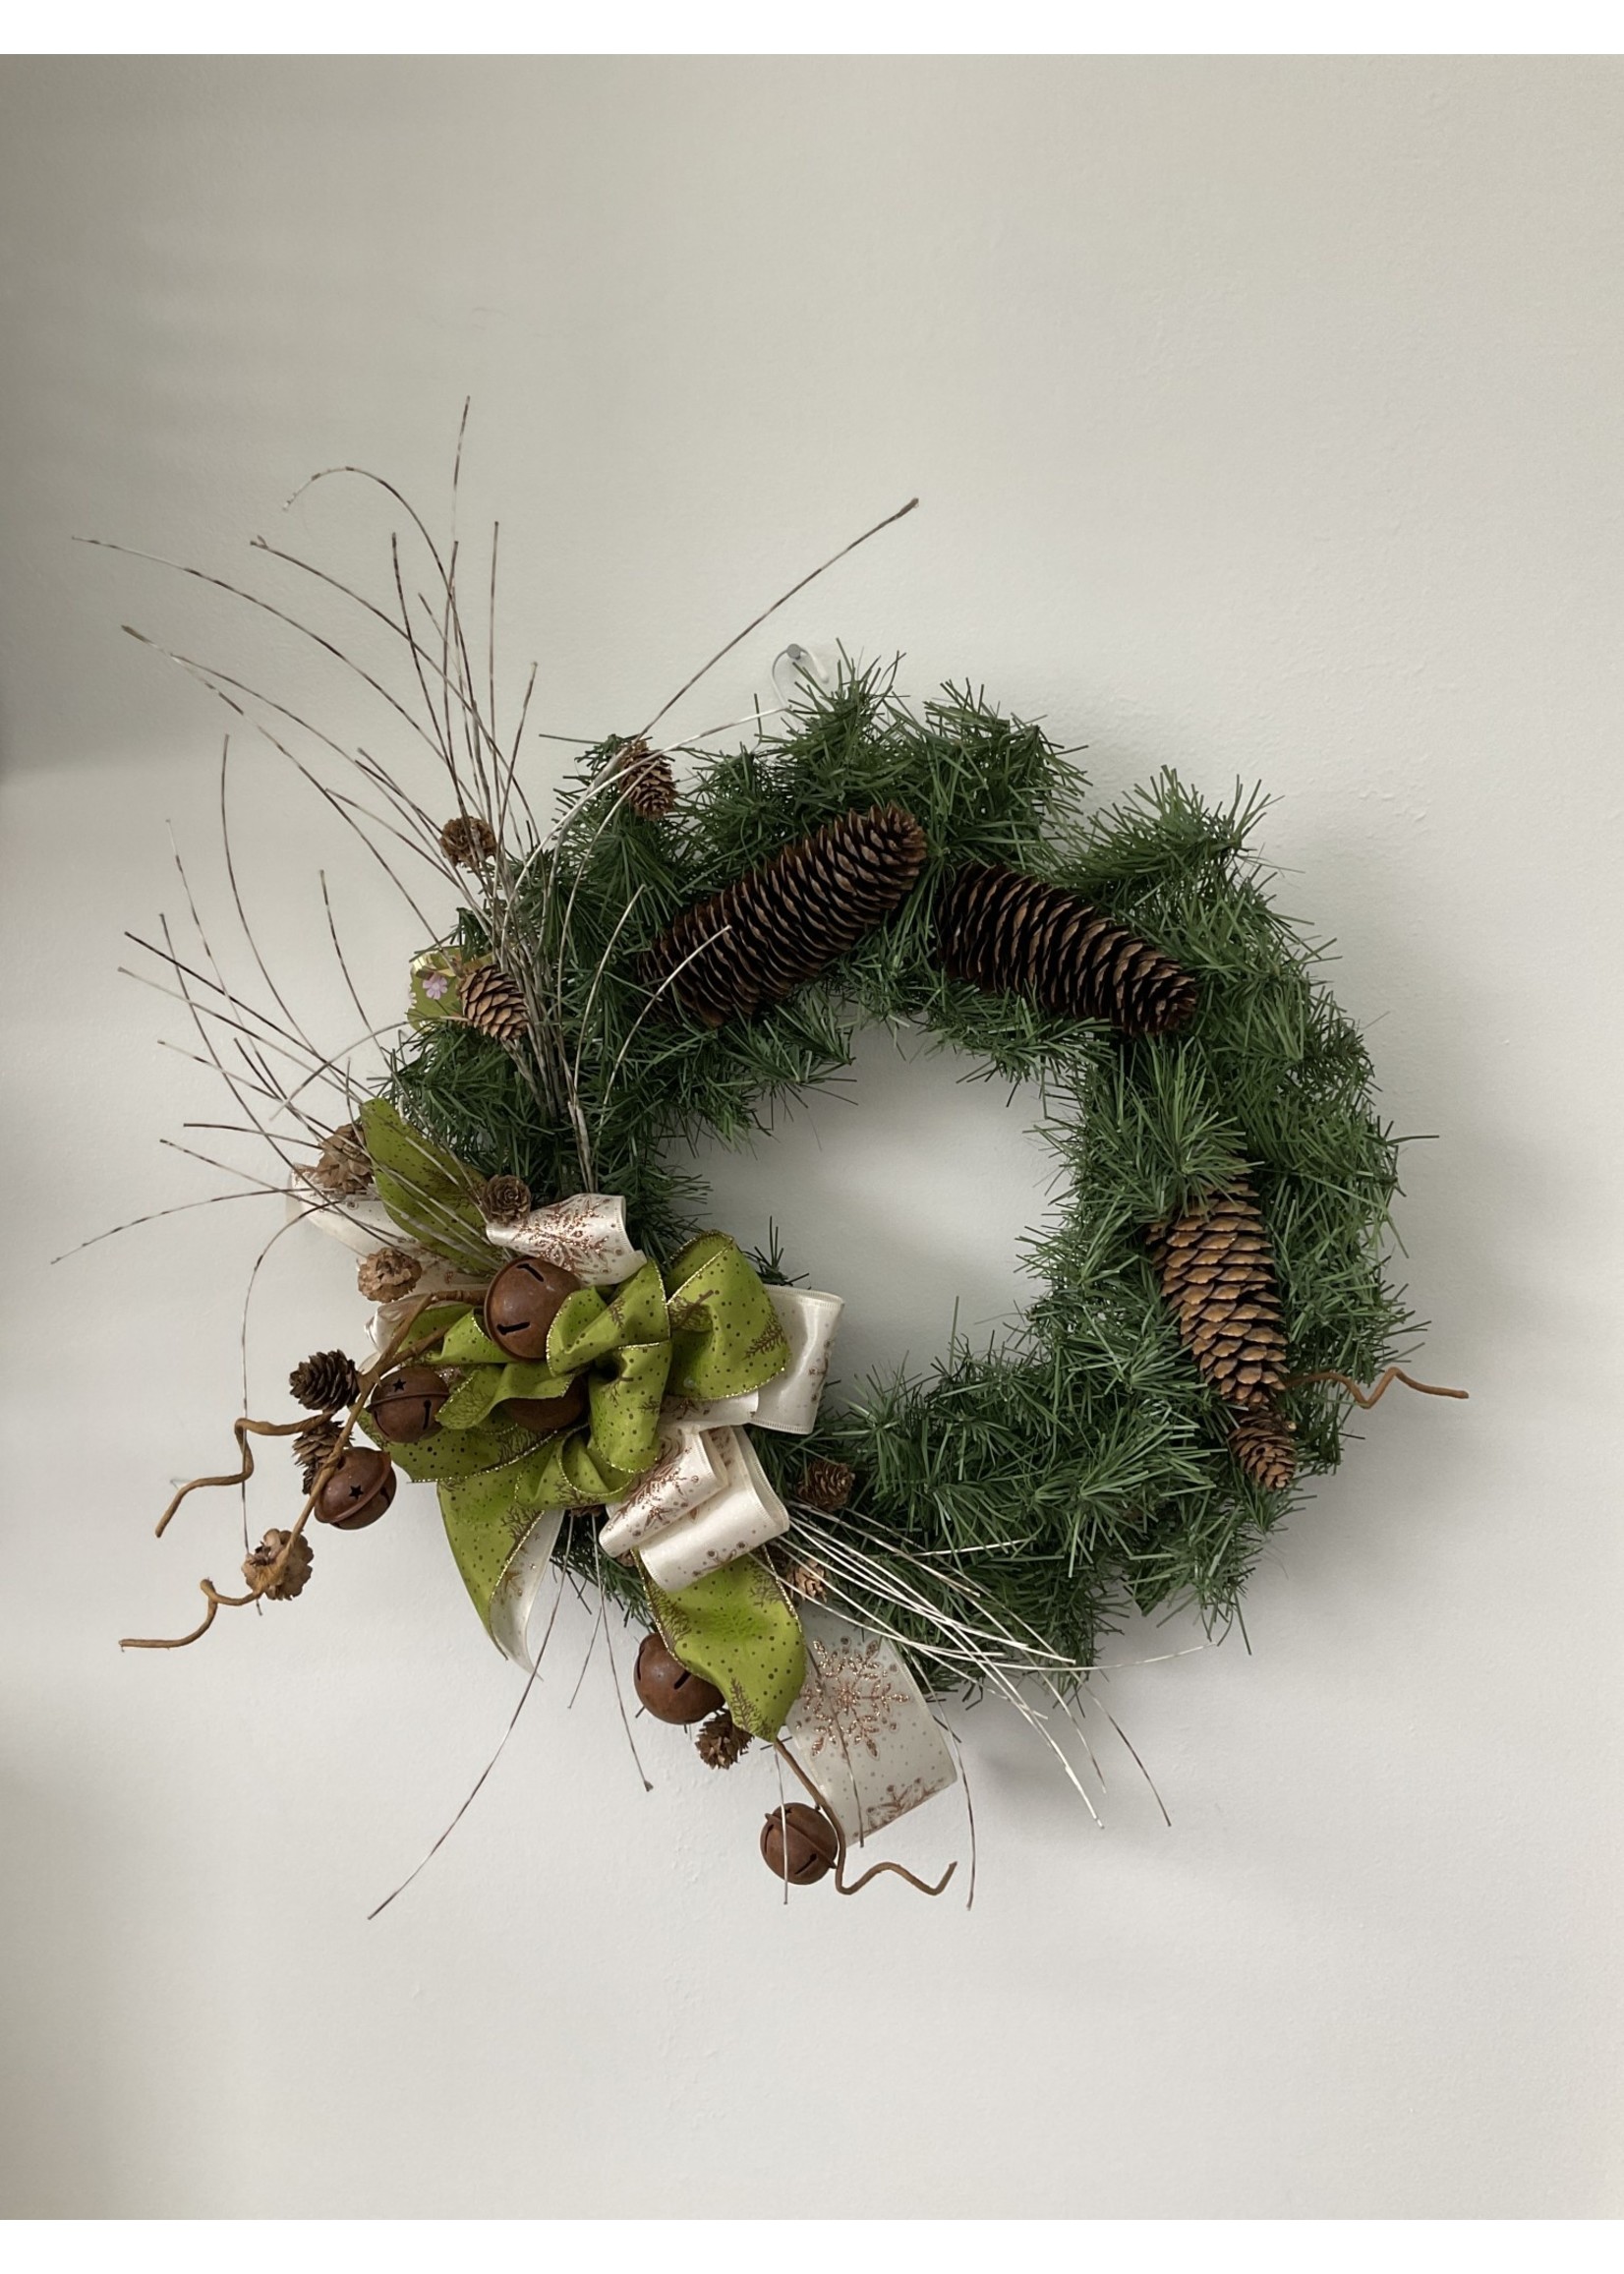 My New Favorite Thing Wreath Grapevine with Greenery, Pinecones, Bells and Green and Gold Ribbons